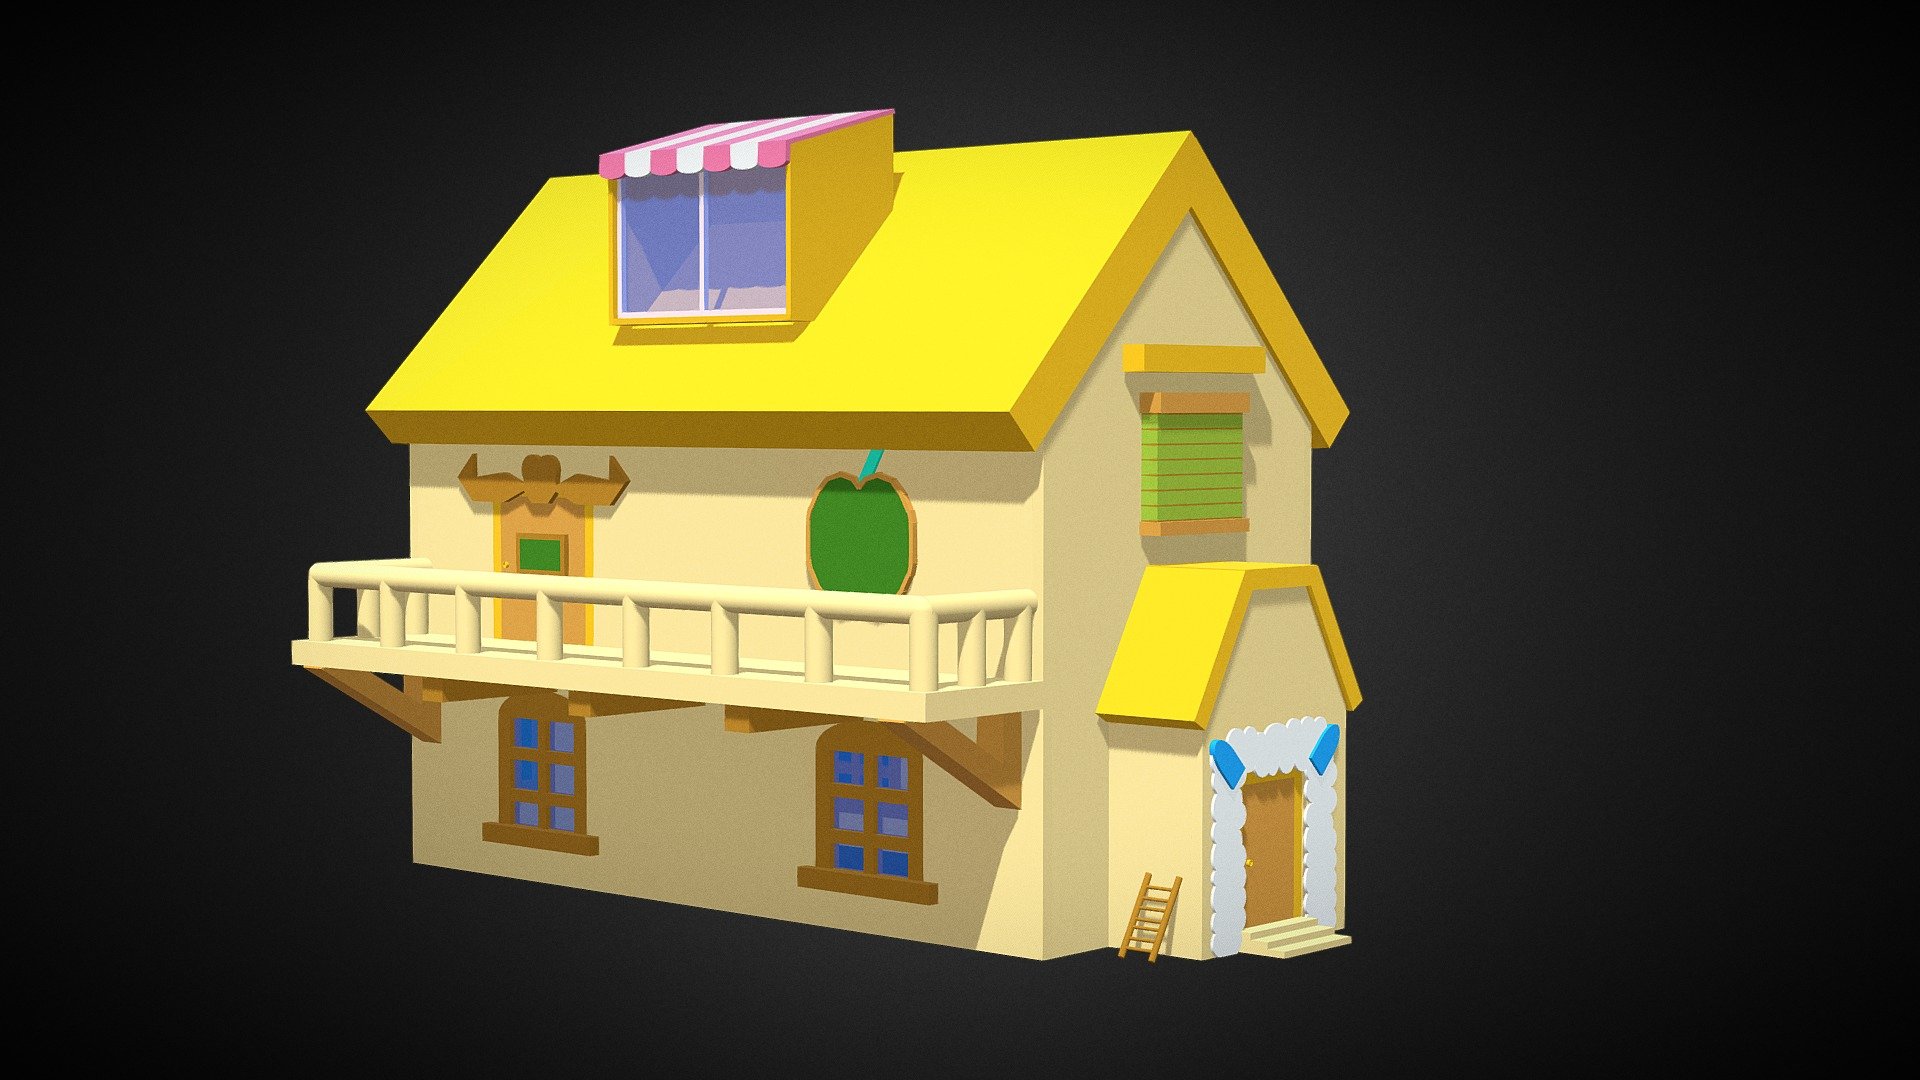 All the models are made by 🏠👉3d.xyz

Page link👉: 3d.xyz

All models are free on this page 🎉

Modeling is very easy and I would recommend anyone to try it ！ 😁😻🎁 - Cartoon House3 - Download Free 3D model by 3d.xyz (@webuild) 3d model